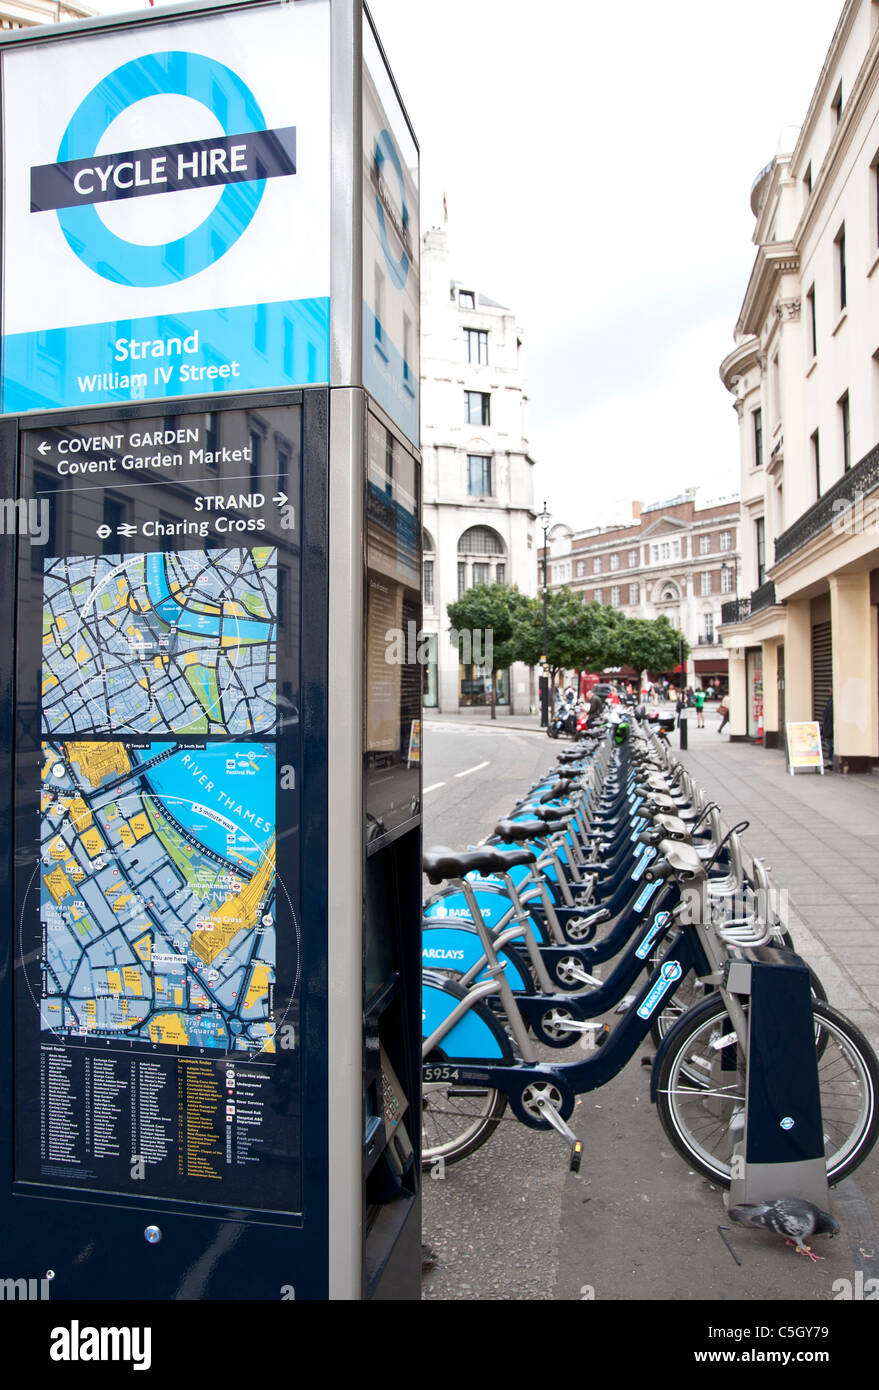 Barclays Cycle hire in London Stock Photo